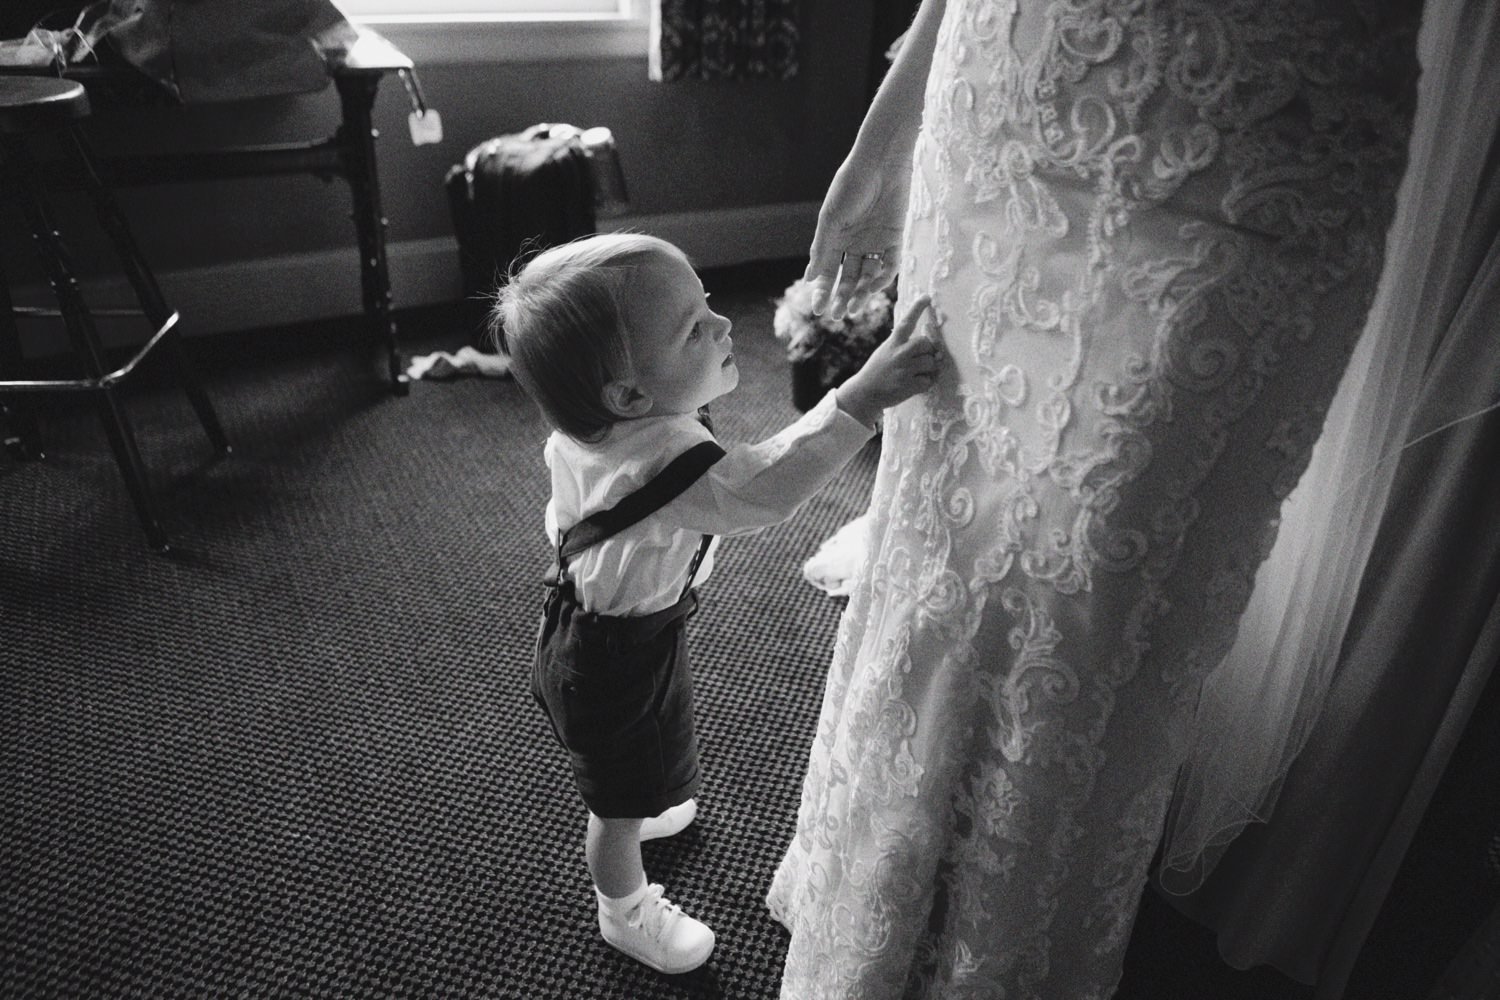  toddler in suspenders and bowtie points at wedding dress worn by bride 